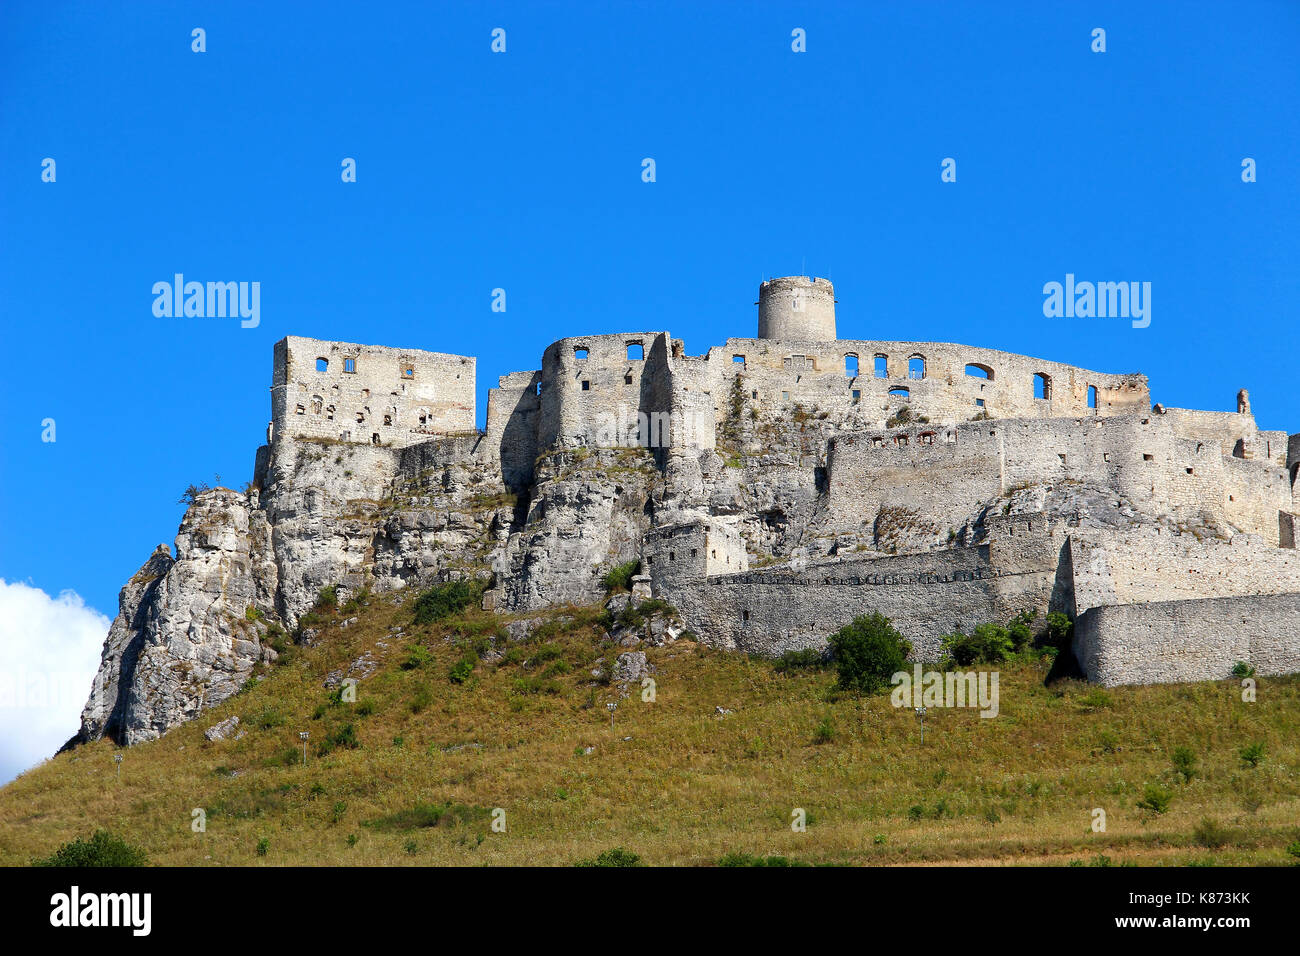 Ruins of Spis Castle (Spissky hrad) in Slovakia, one of the biggest castles in Europe Stock Photo